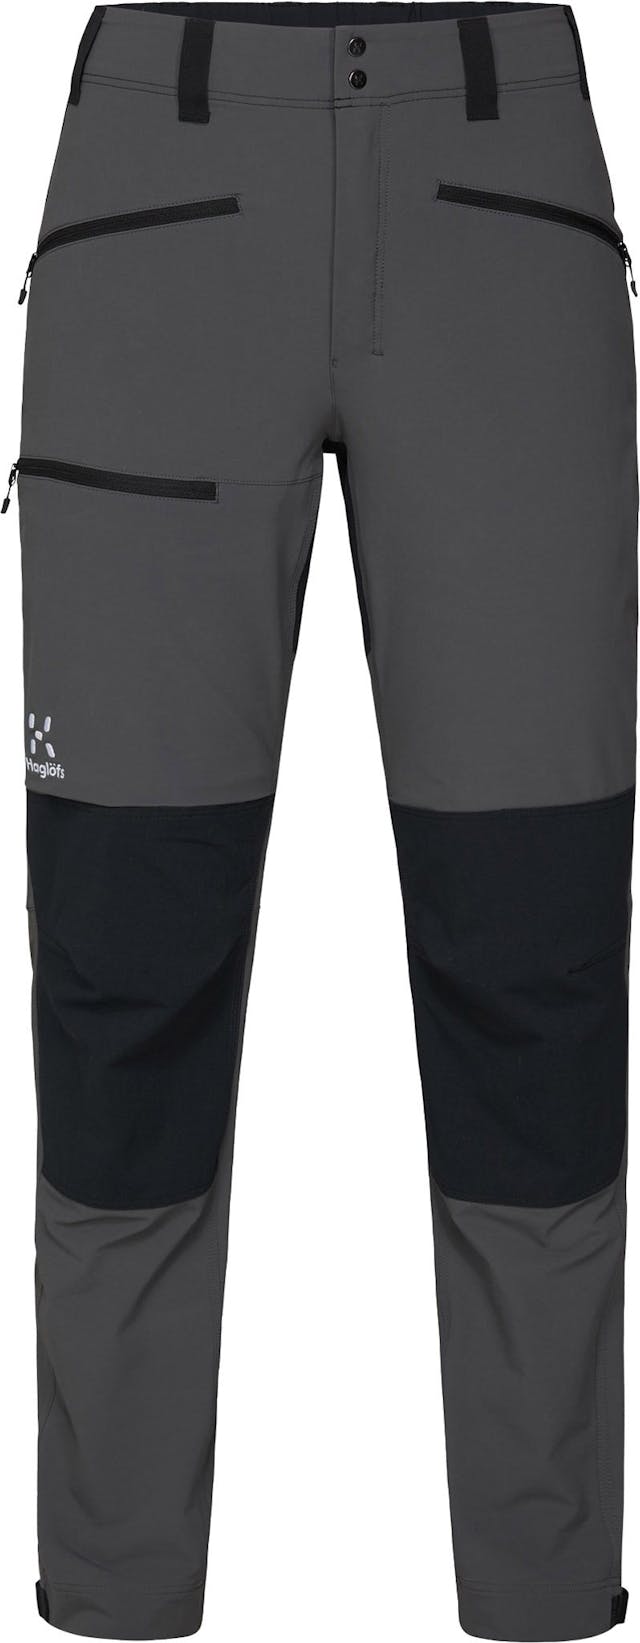 Product image for Mid Standard Pant - Women's